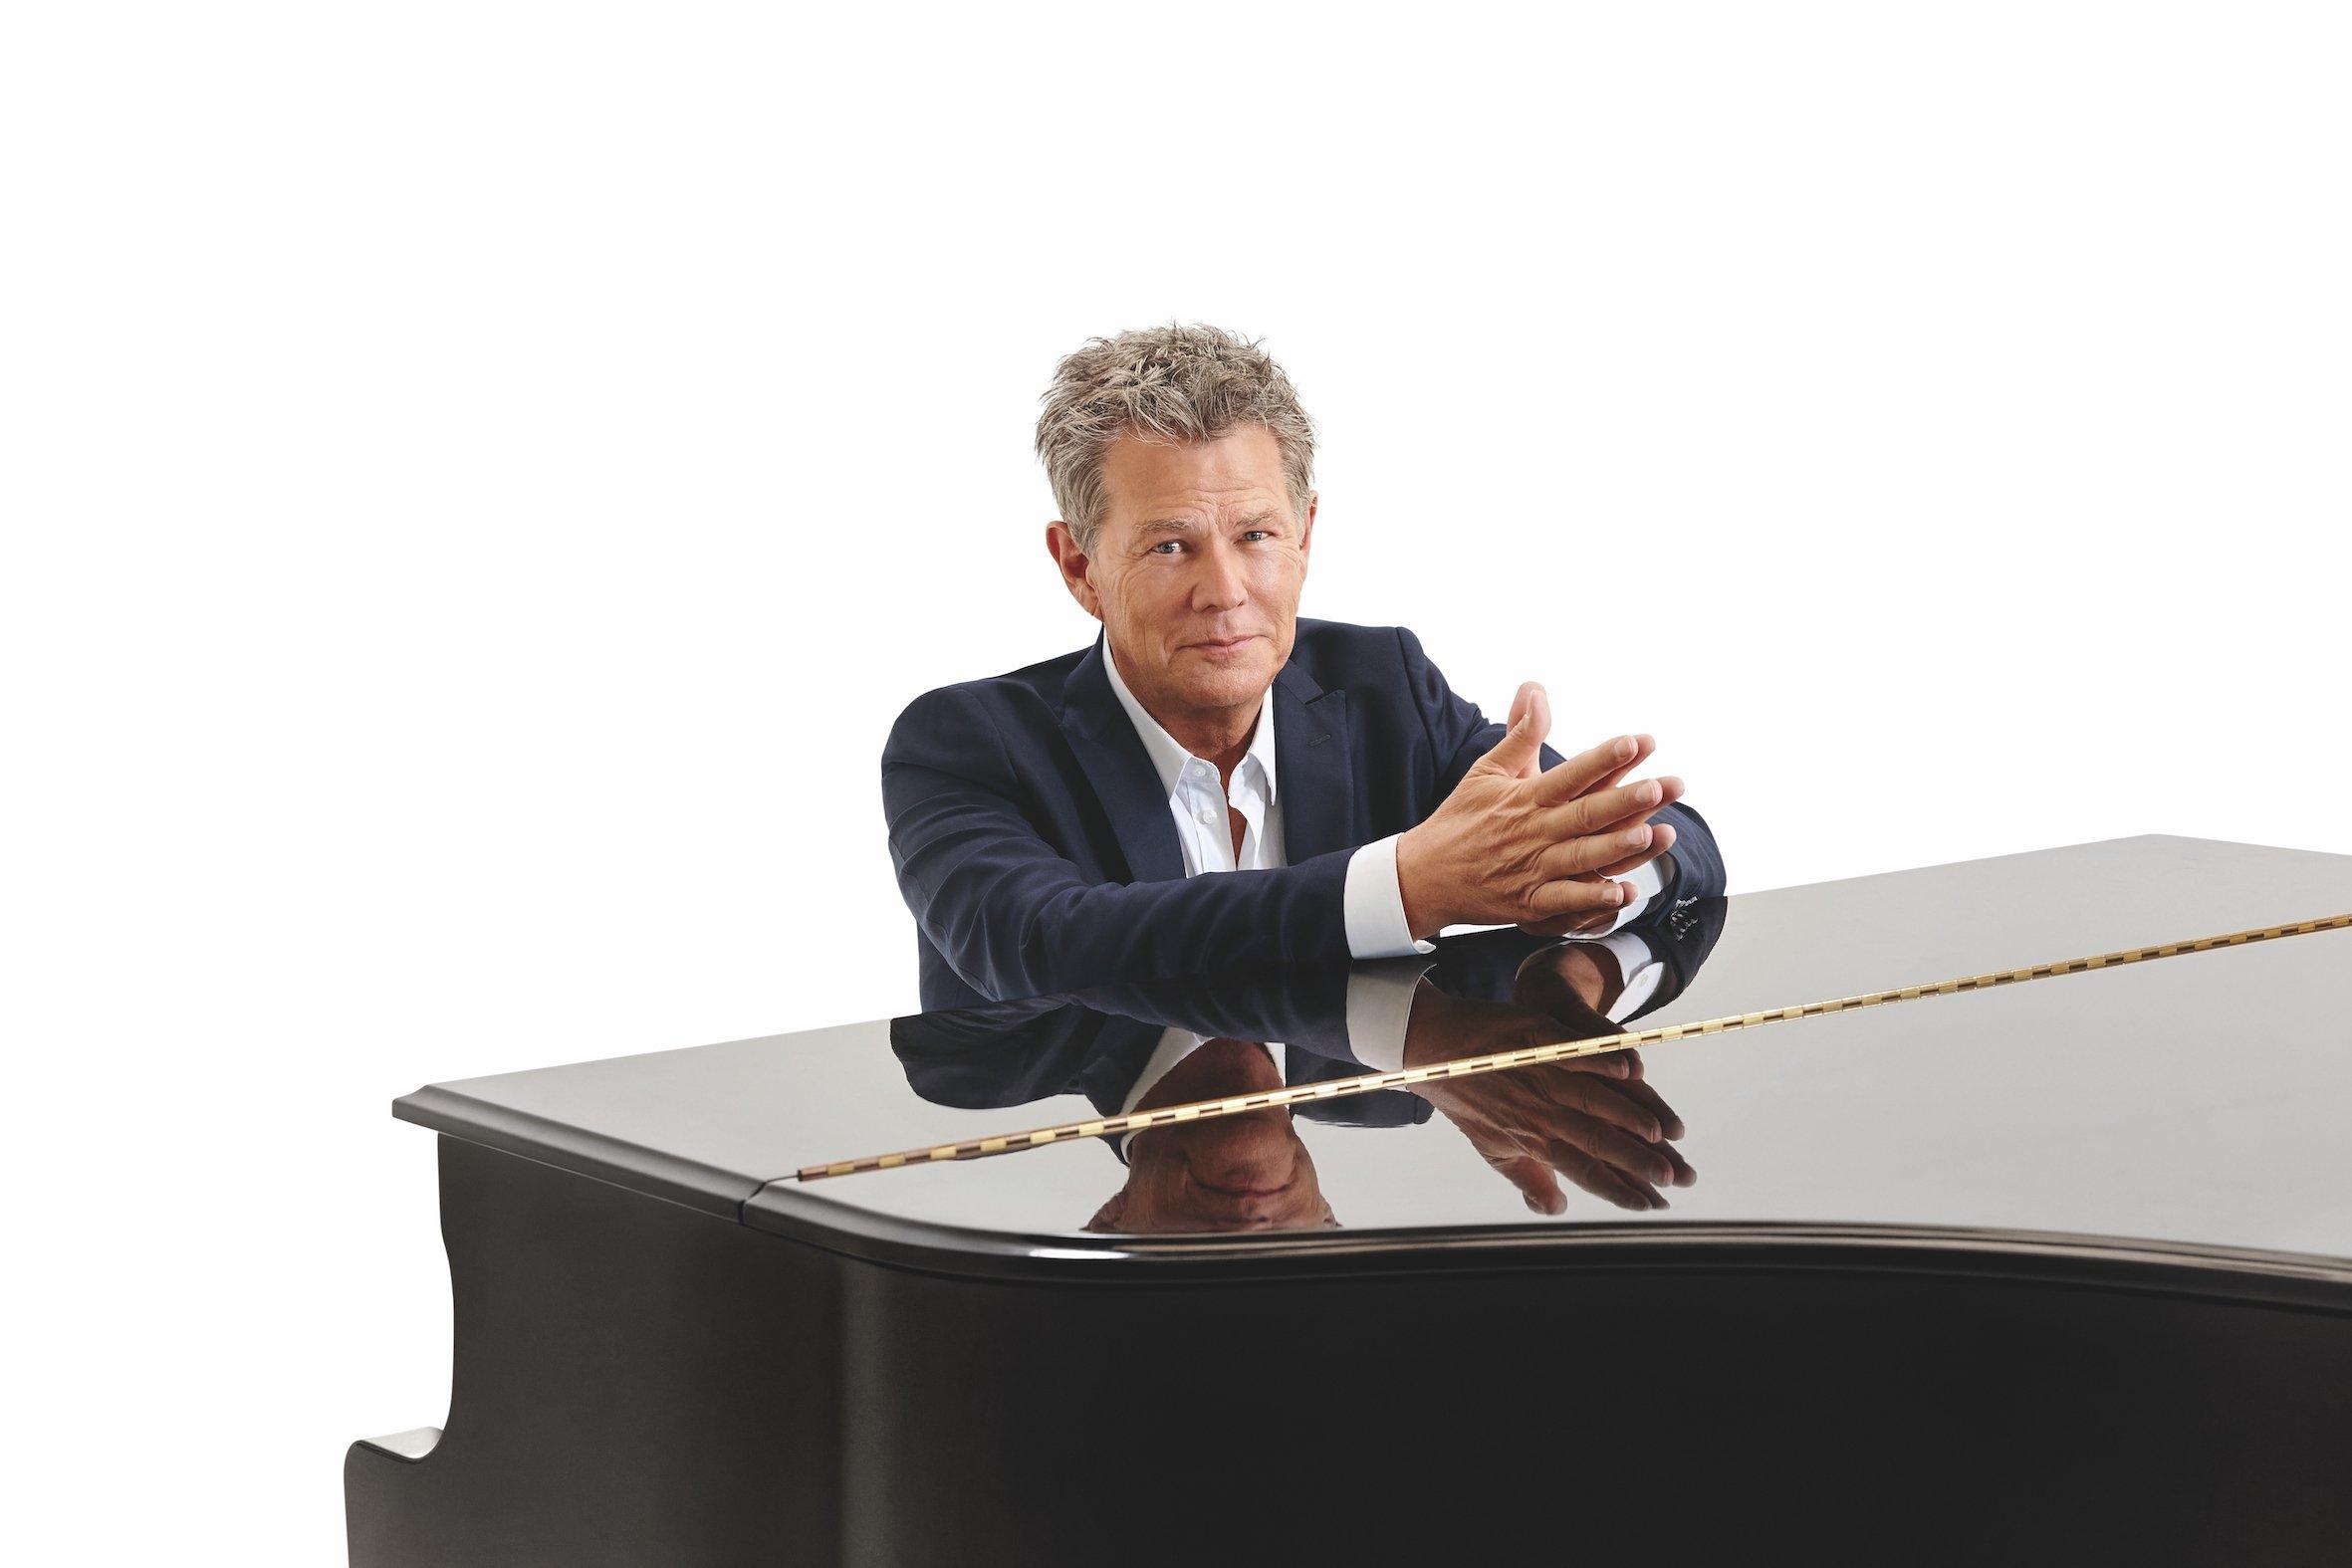 David Foster productions